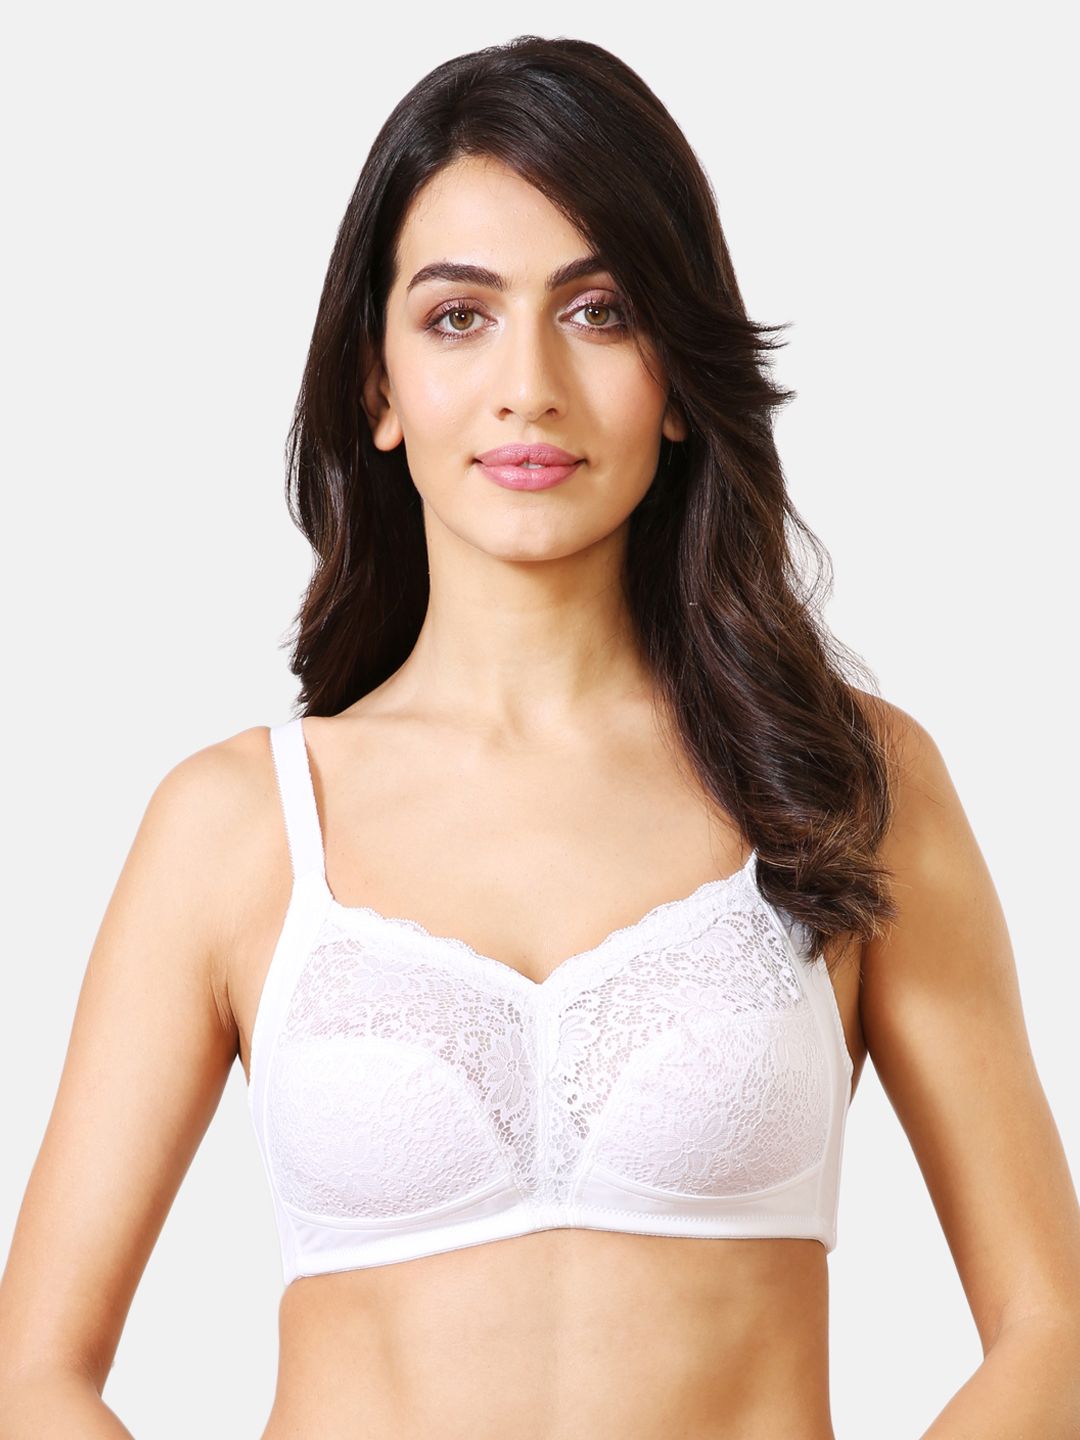 Van Heusen White Solid Non-Wired Non Padded Everyday Soft Cup Bra ILIBR1LXSWH22004 Price in India